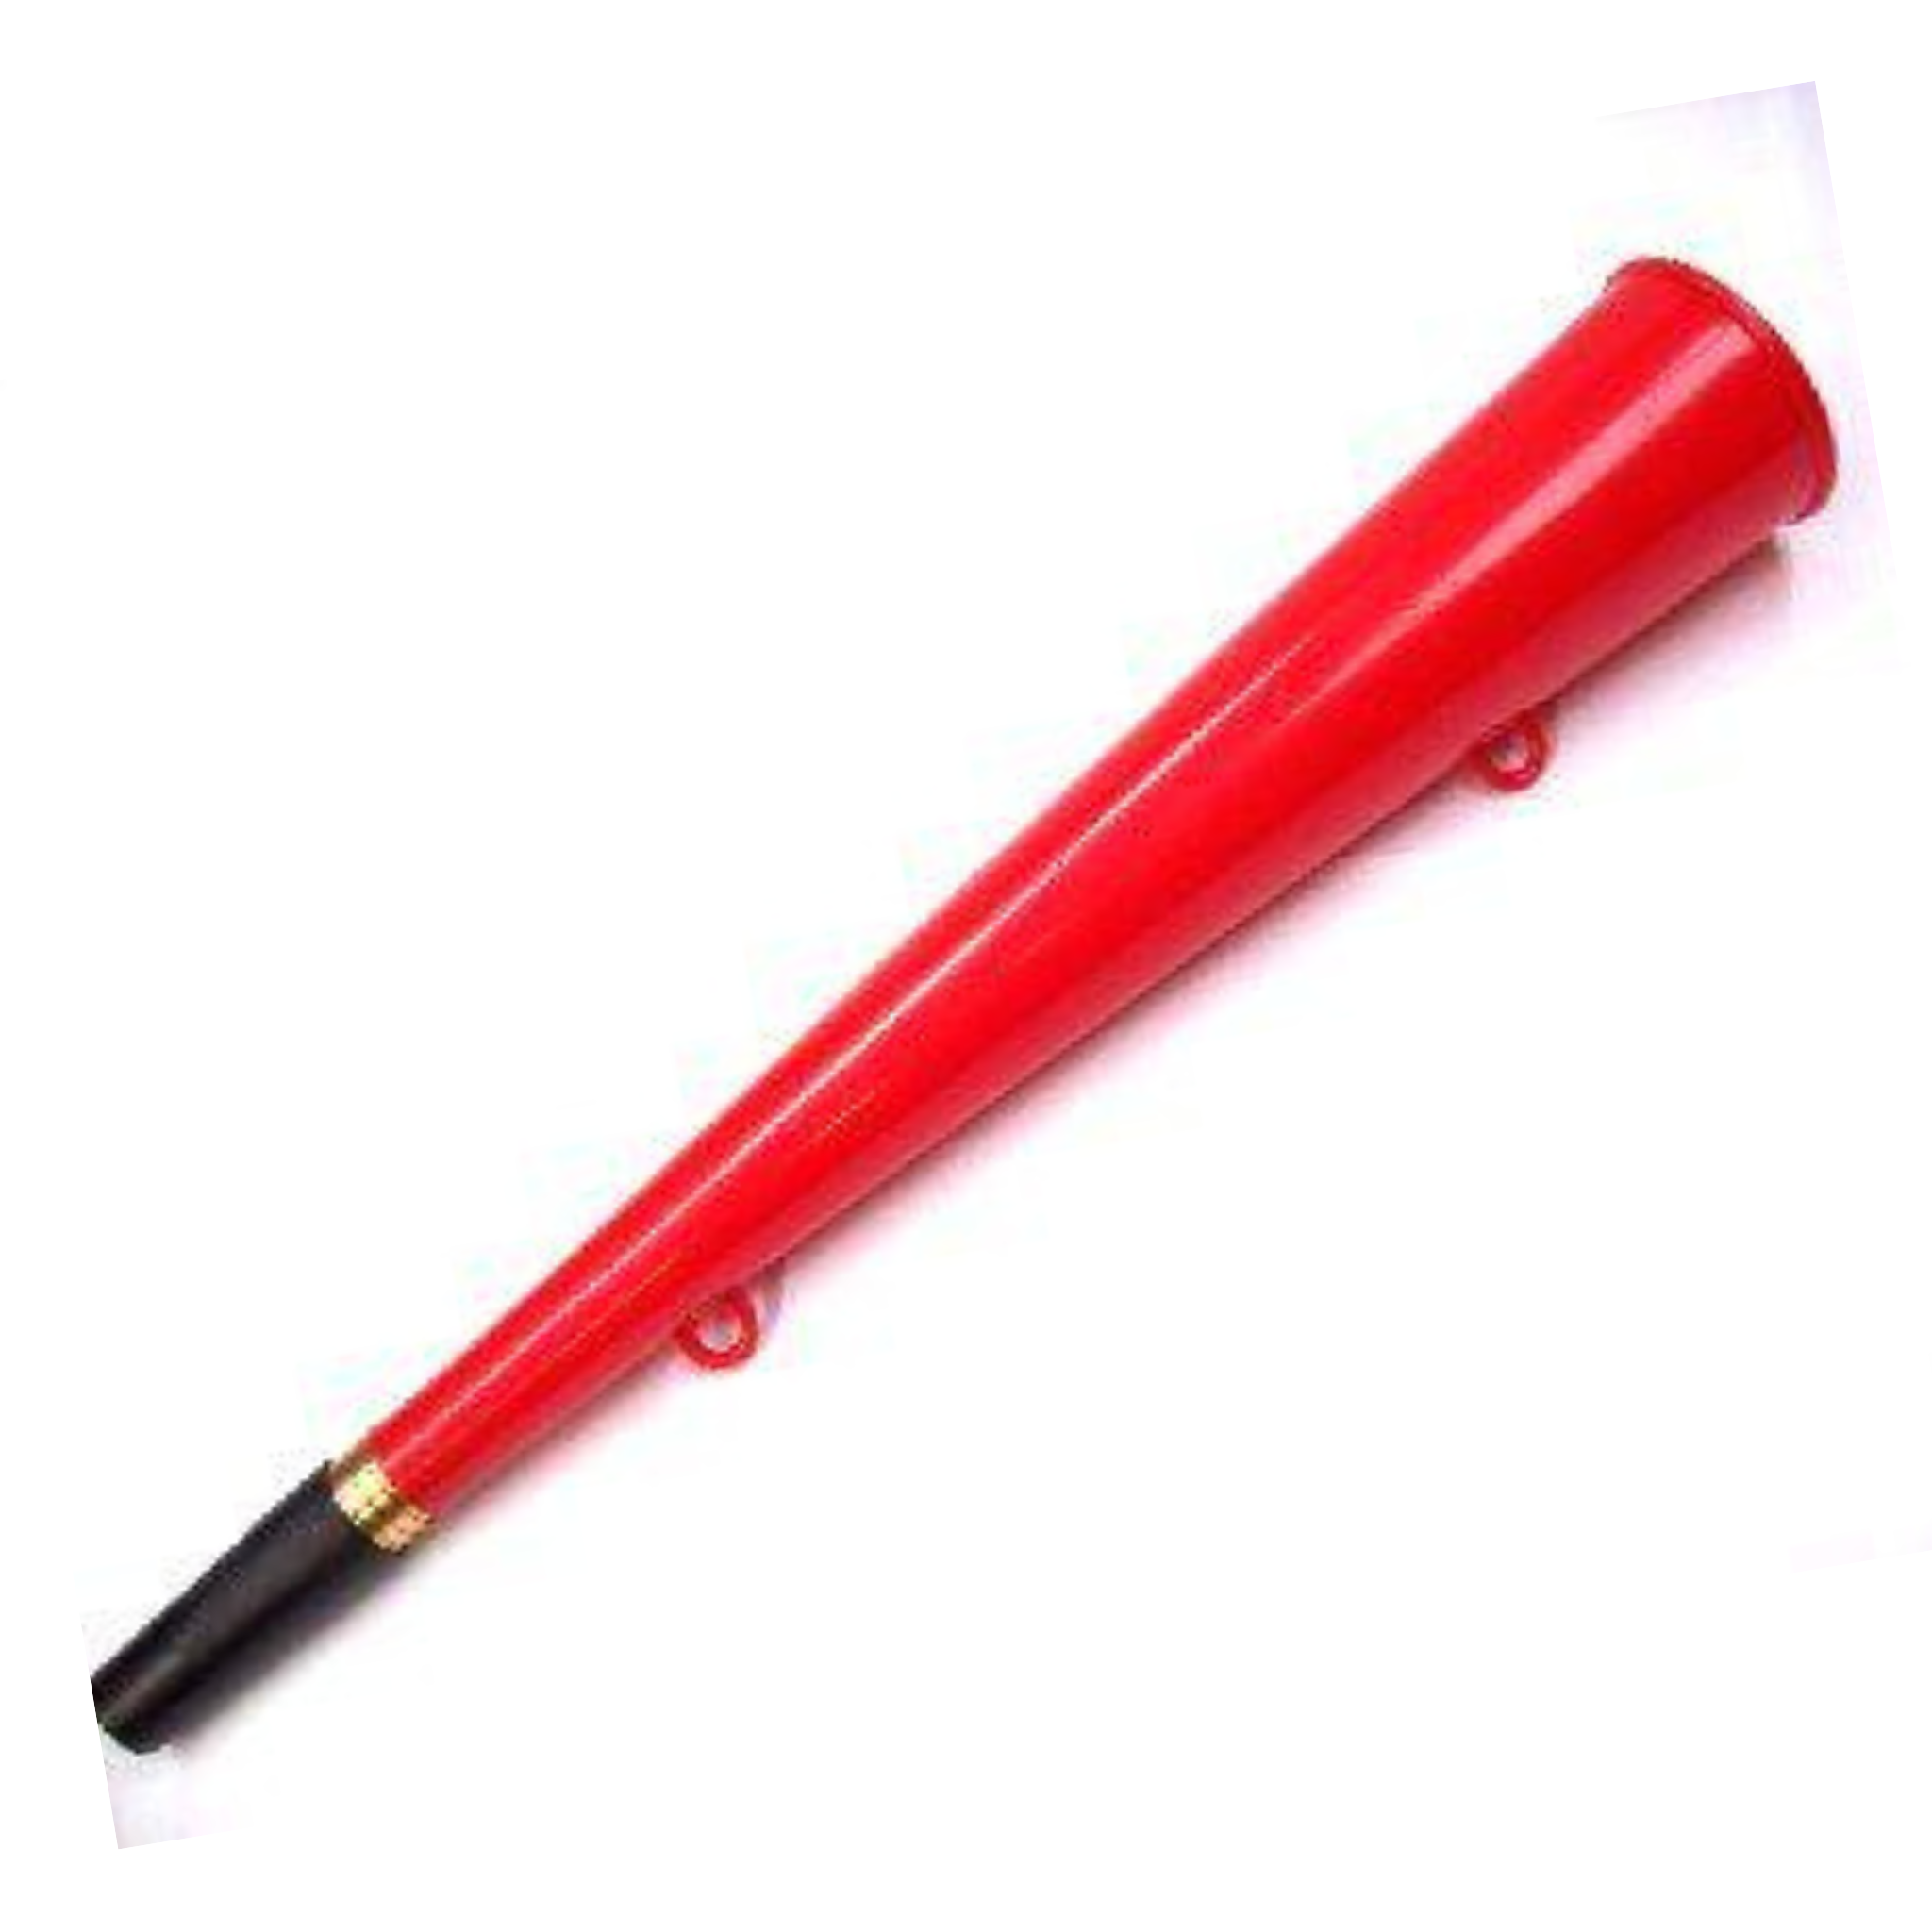 Bright orange plastic warning horn with a replaceable reed mouthpiece